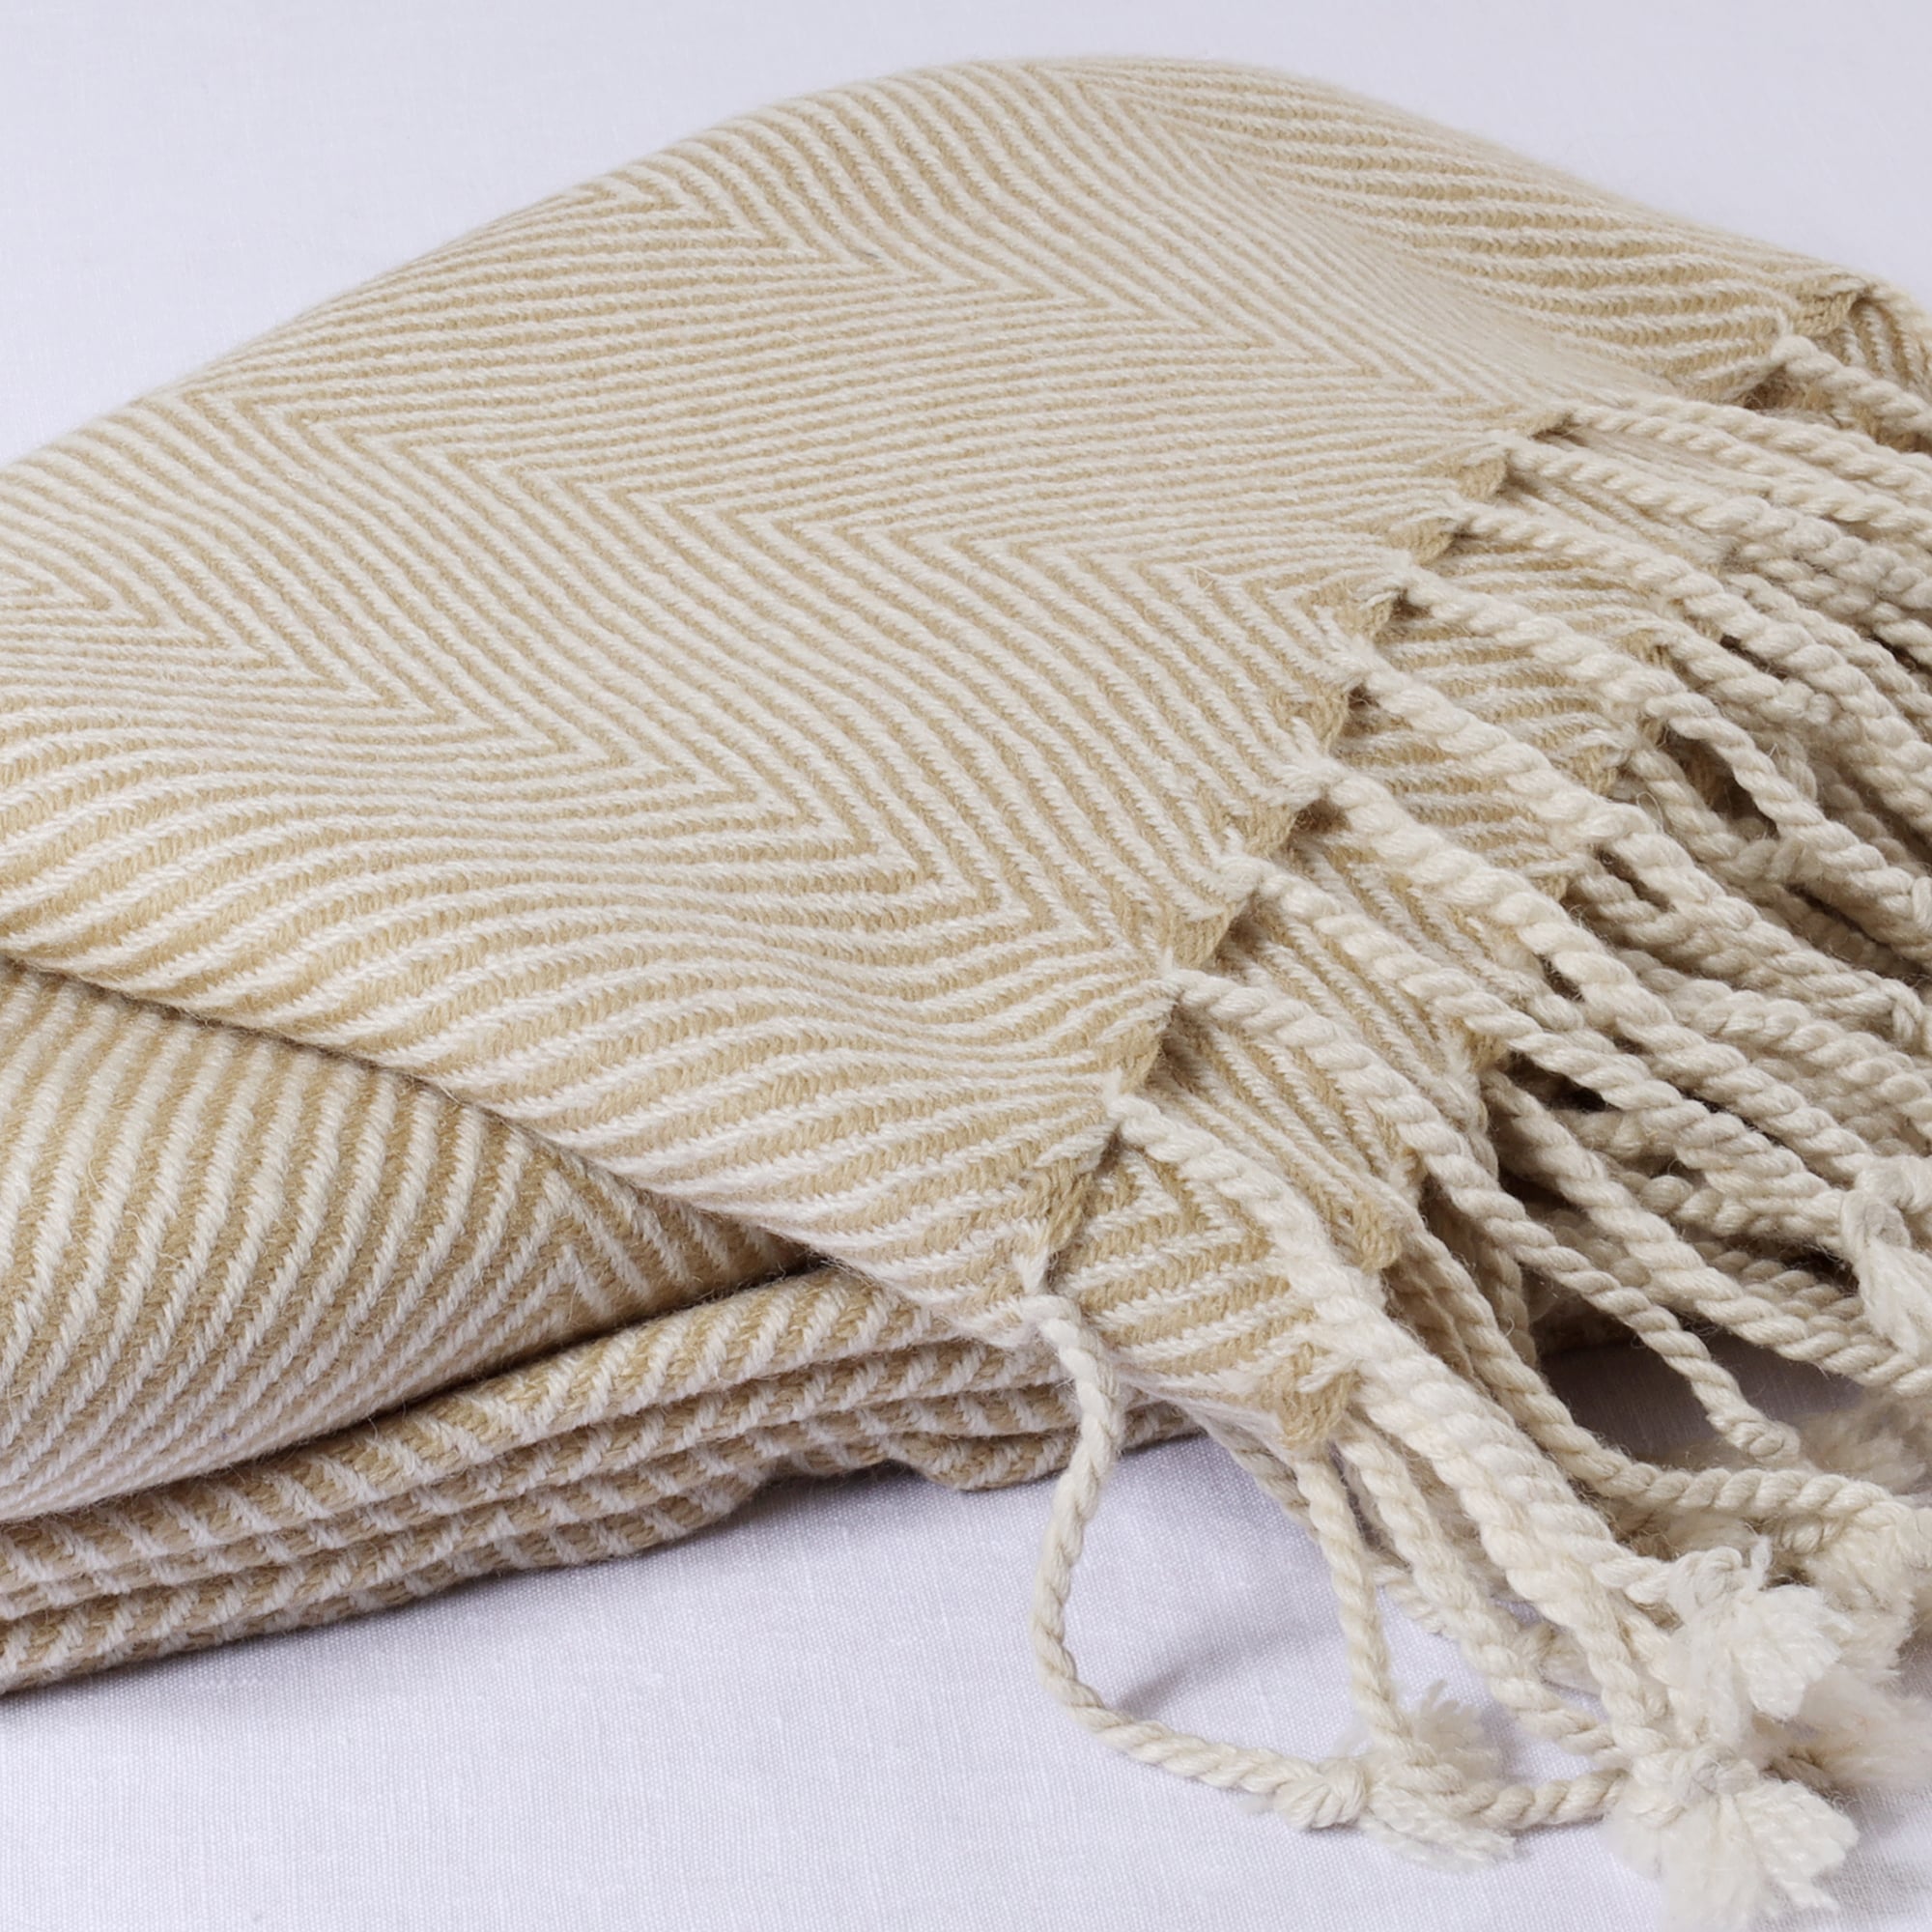 folded natural herringbone throw on a white background showing the weave detail and the knotted cream tassle edge